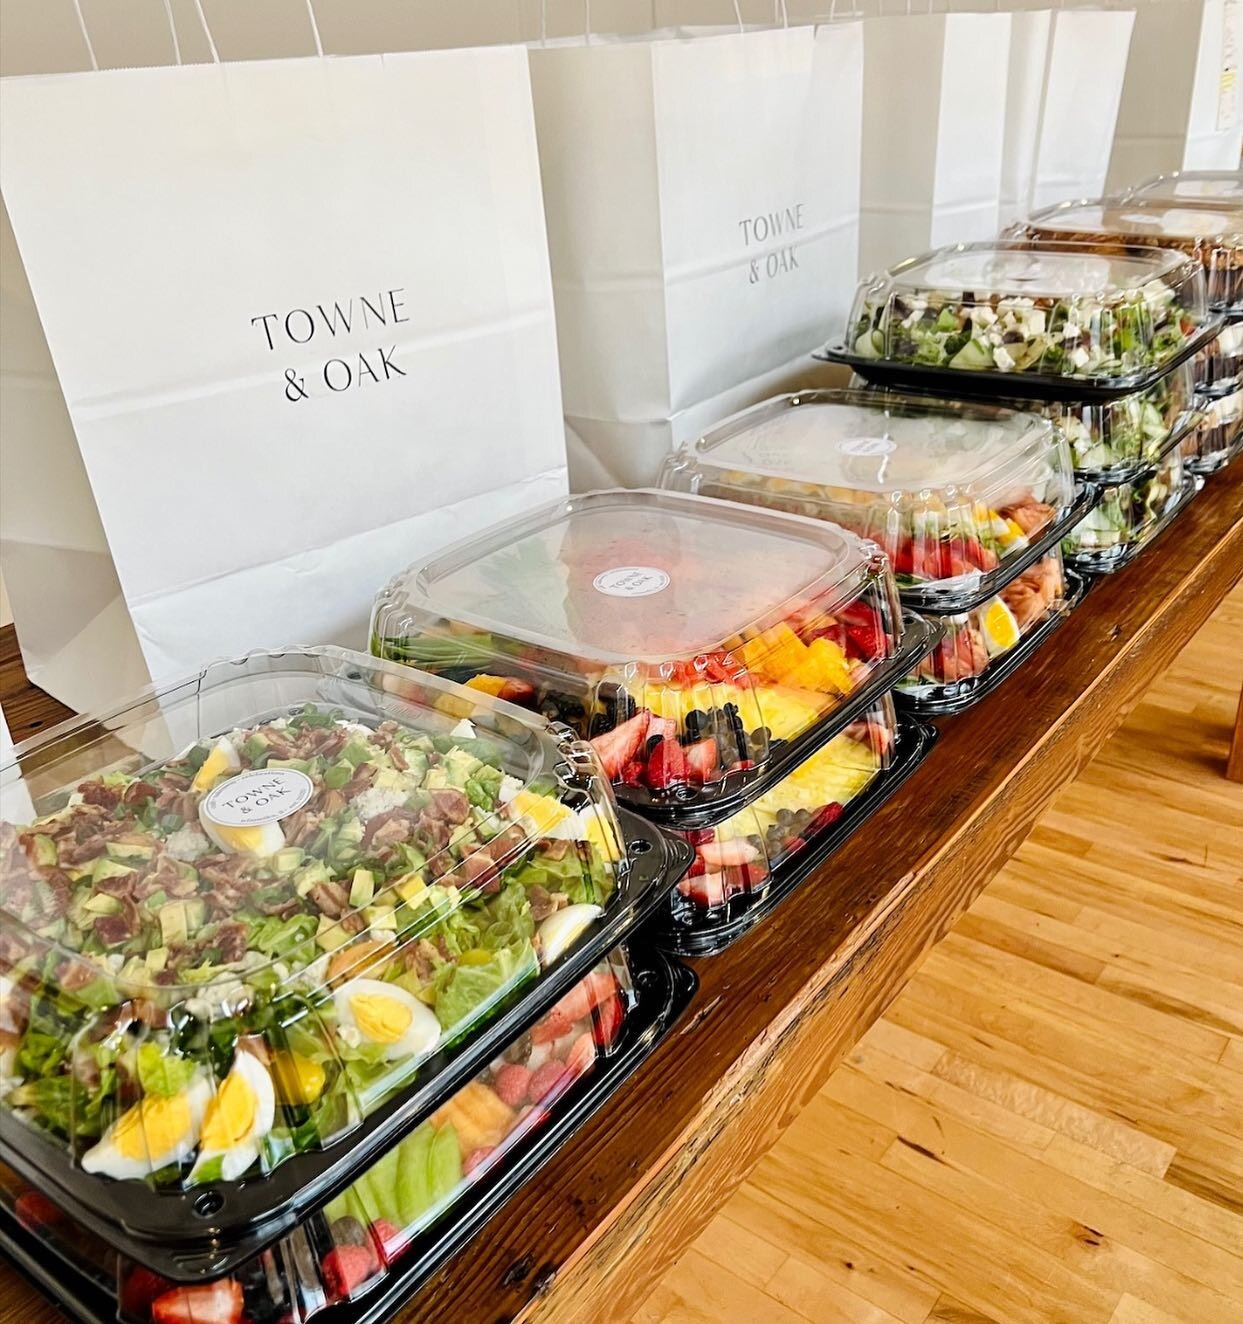 It&rsquo;s summer picnic season! Salads, tartines, cheese &amp; charcuterie are just a few of our menu items that would be perfect for your Ravinia and 4th of July gatherings. 

Email events@towneandoak.com to place your order! (Reminder - we&rsquo;r